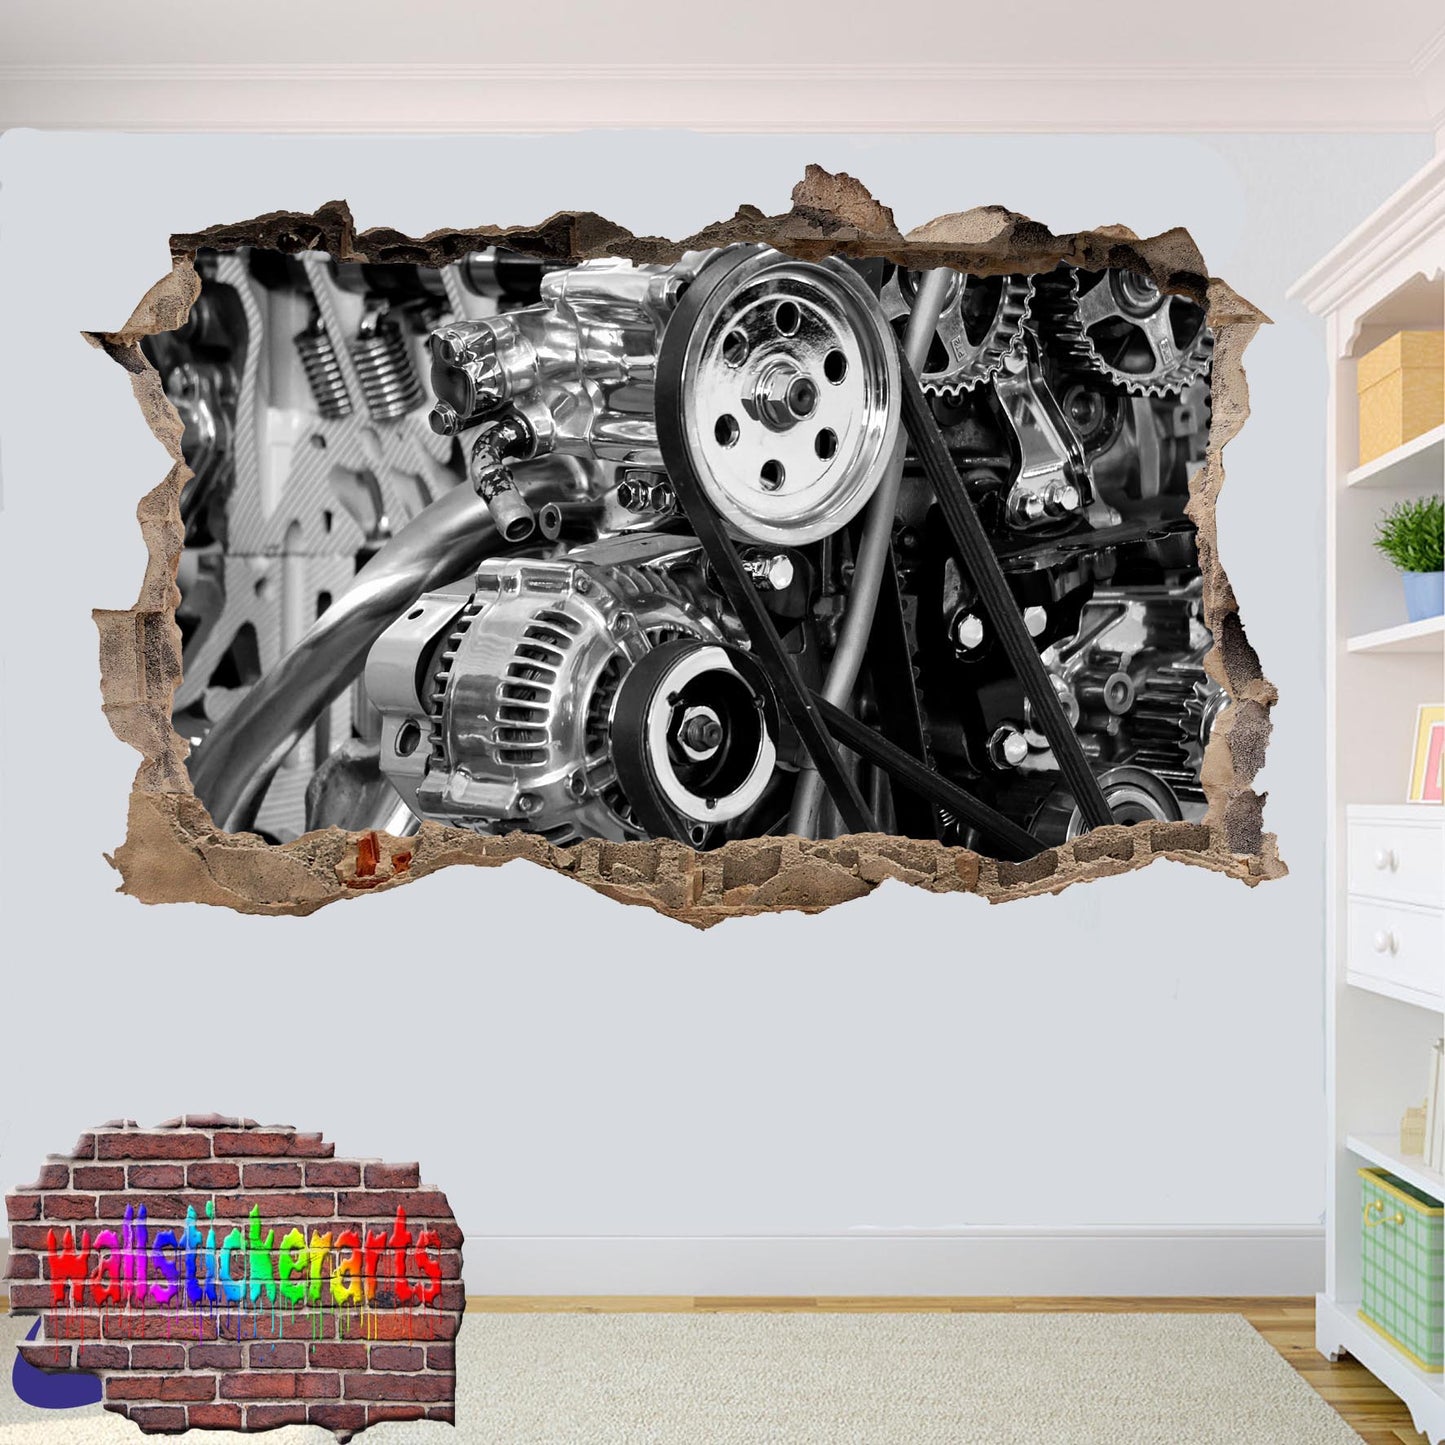 Poweful Car Engine 3d Art Smashed Effect Wall Sticker Room Office Nursery Shop Decoration Decal Mural YV8